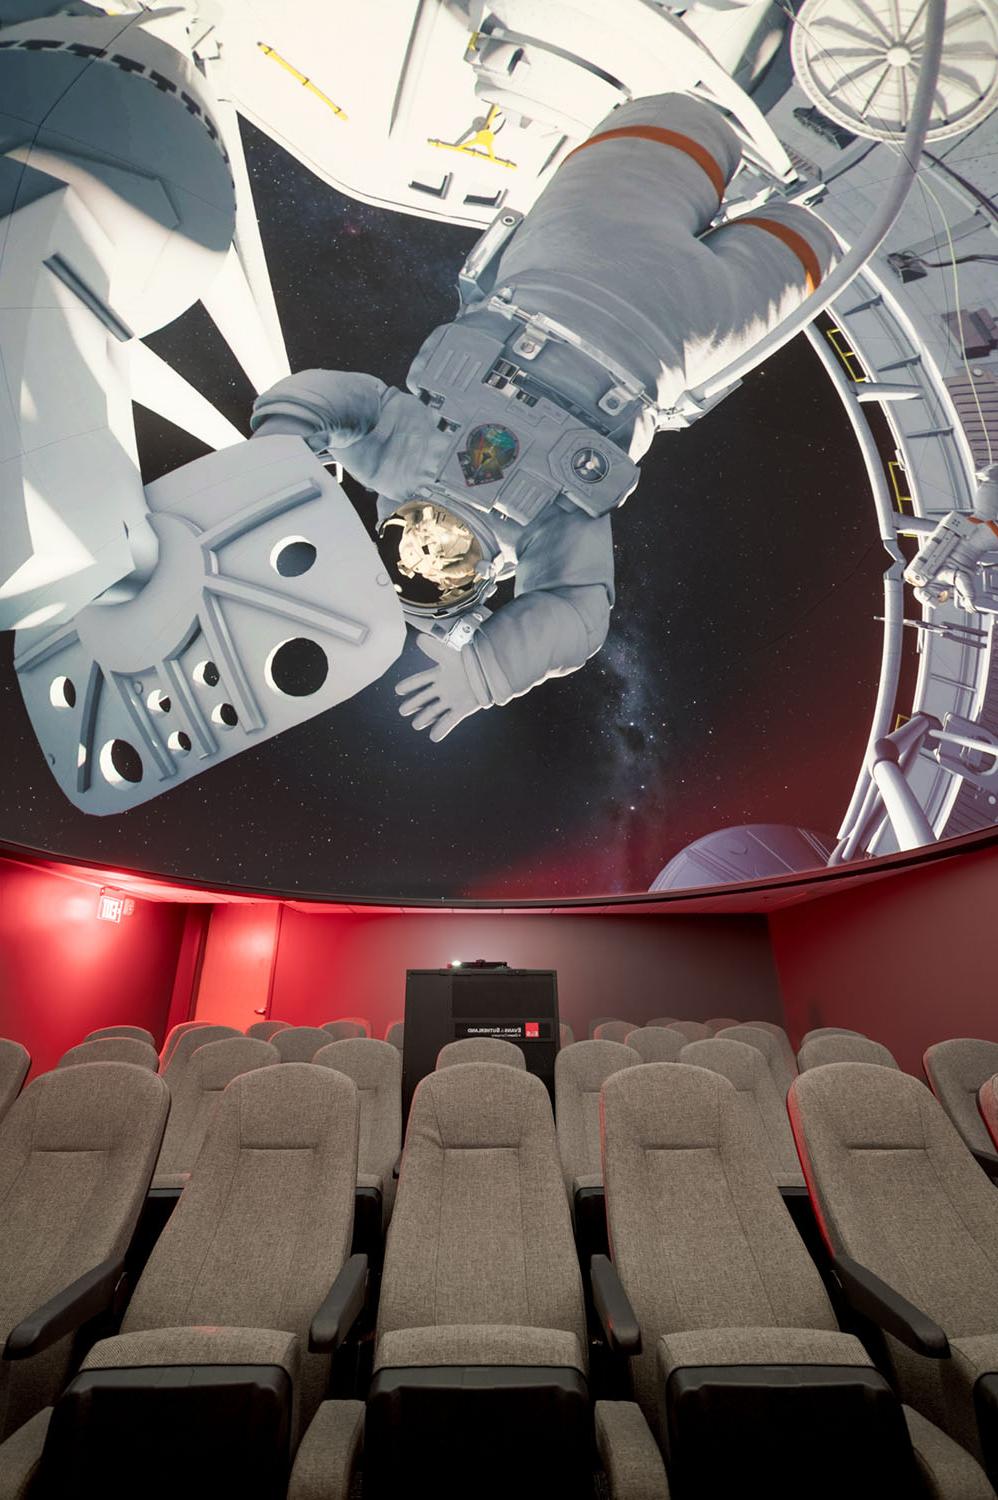 Planetarium seating and dome with spacewalk image on screen